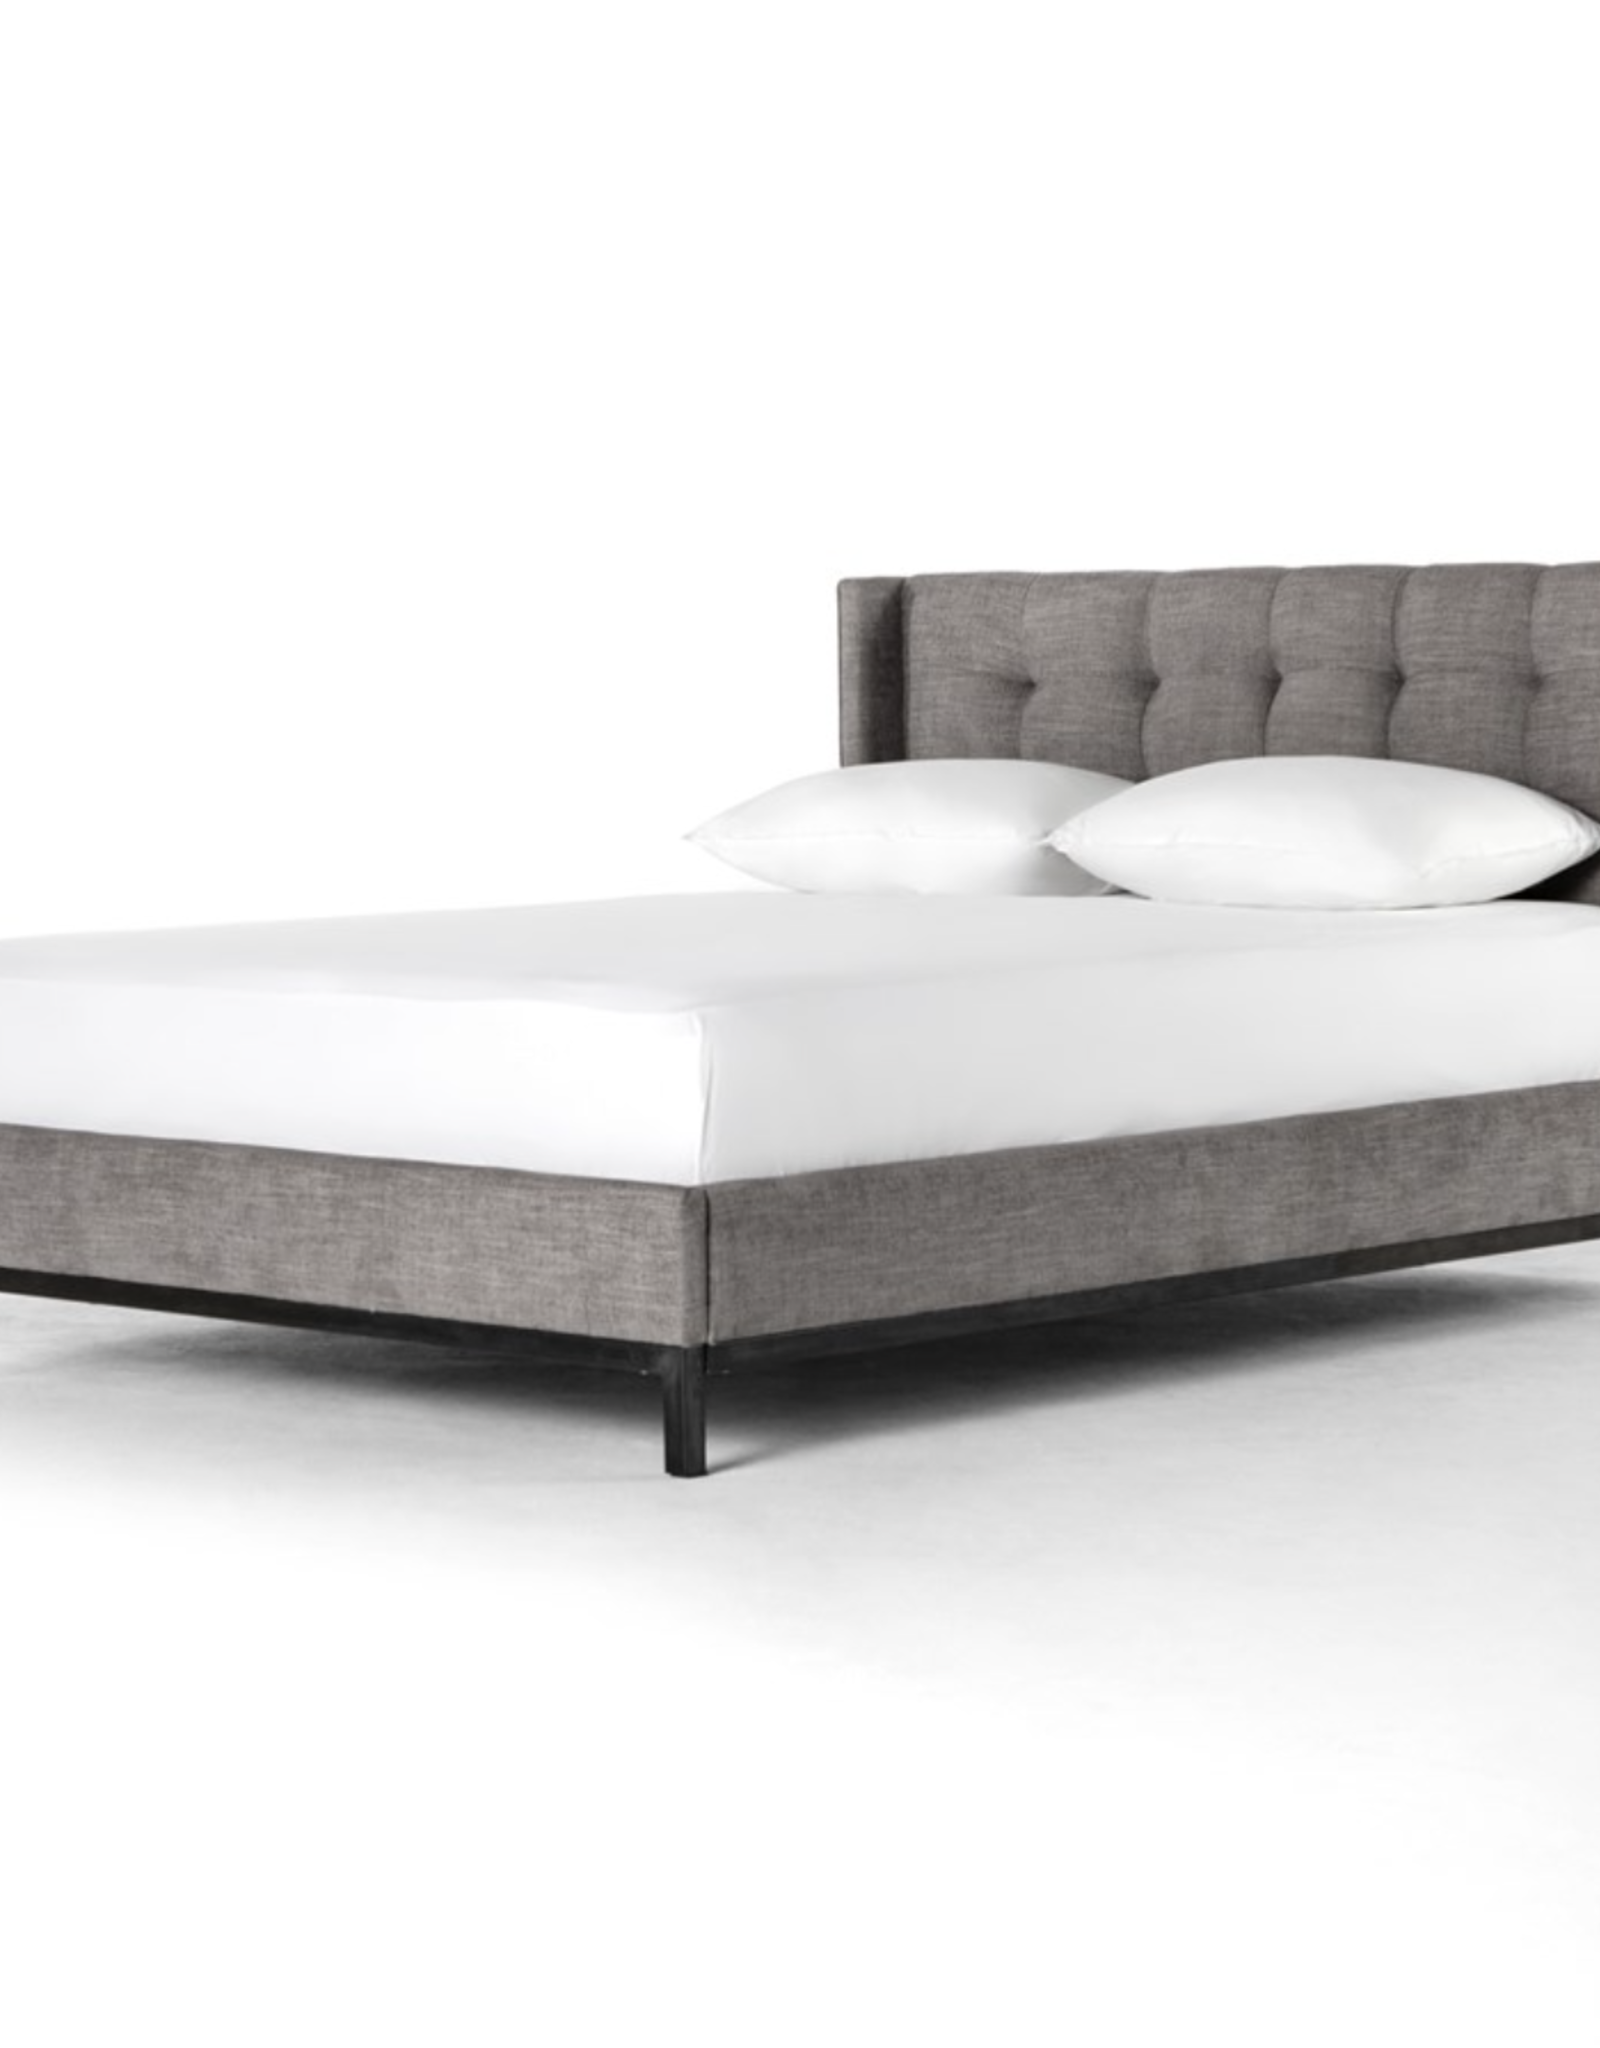 Newhall Bed in Harbor Grey - King